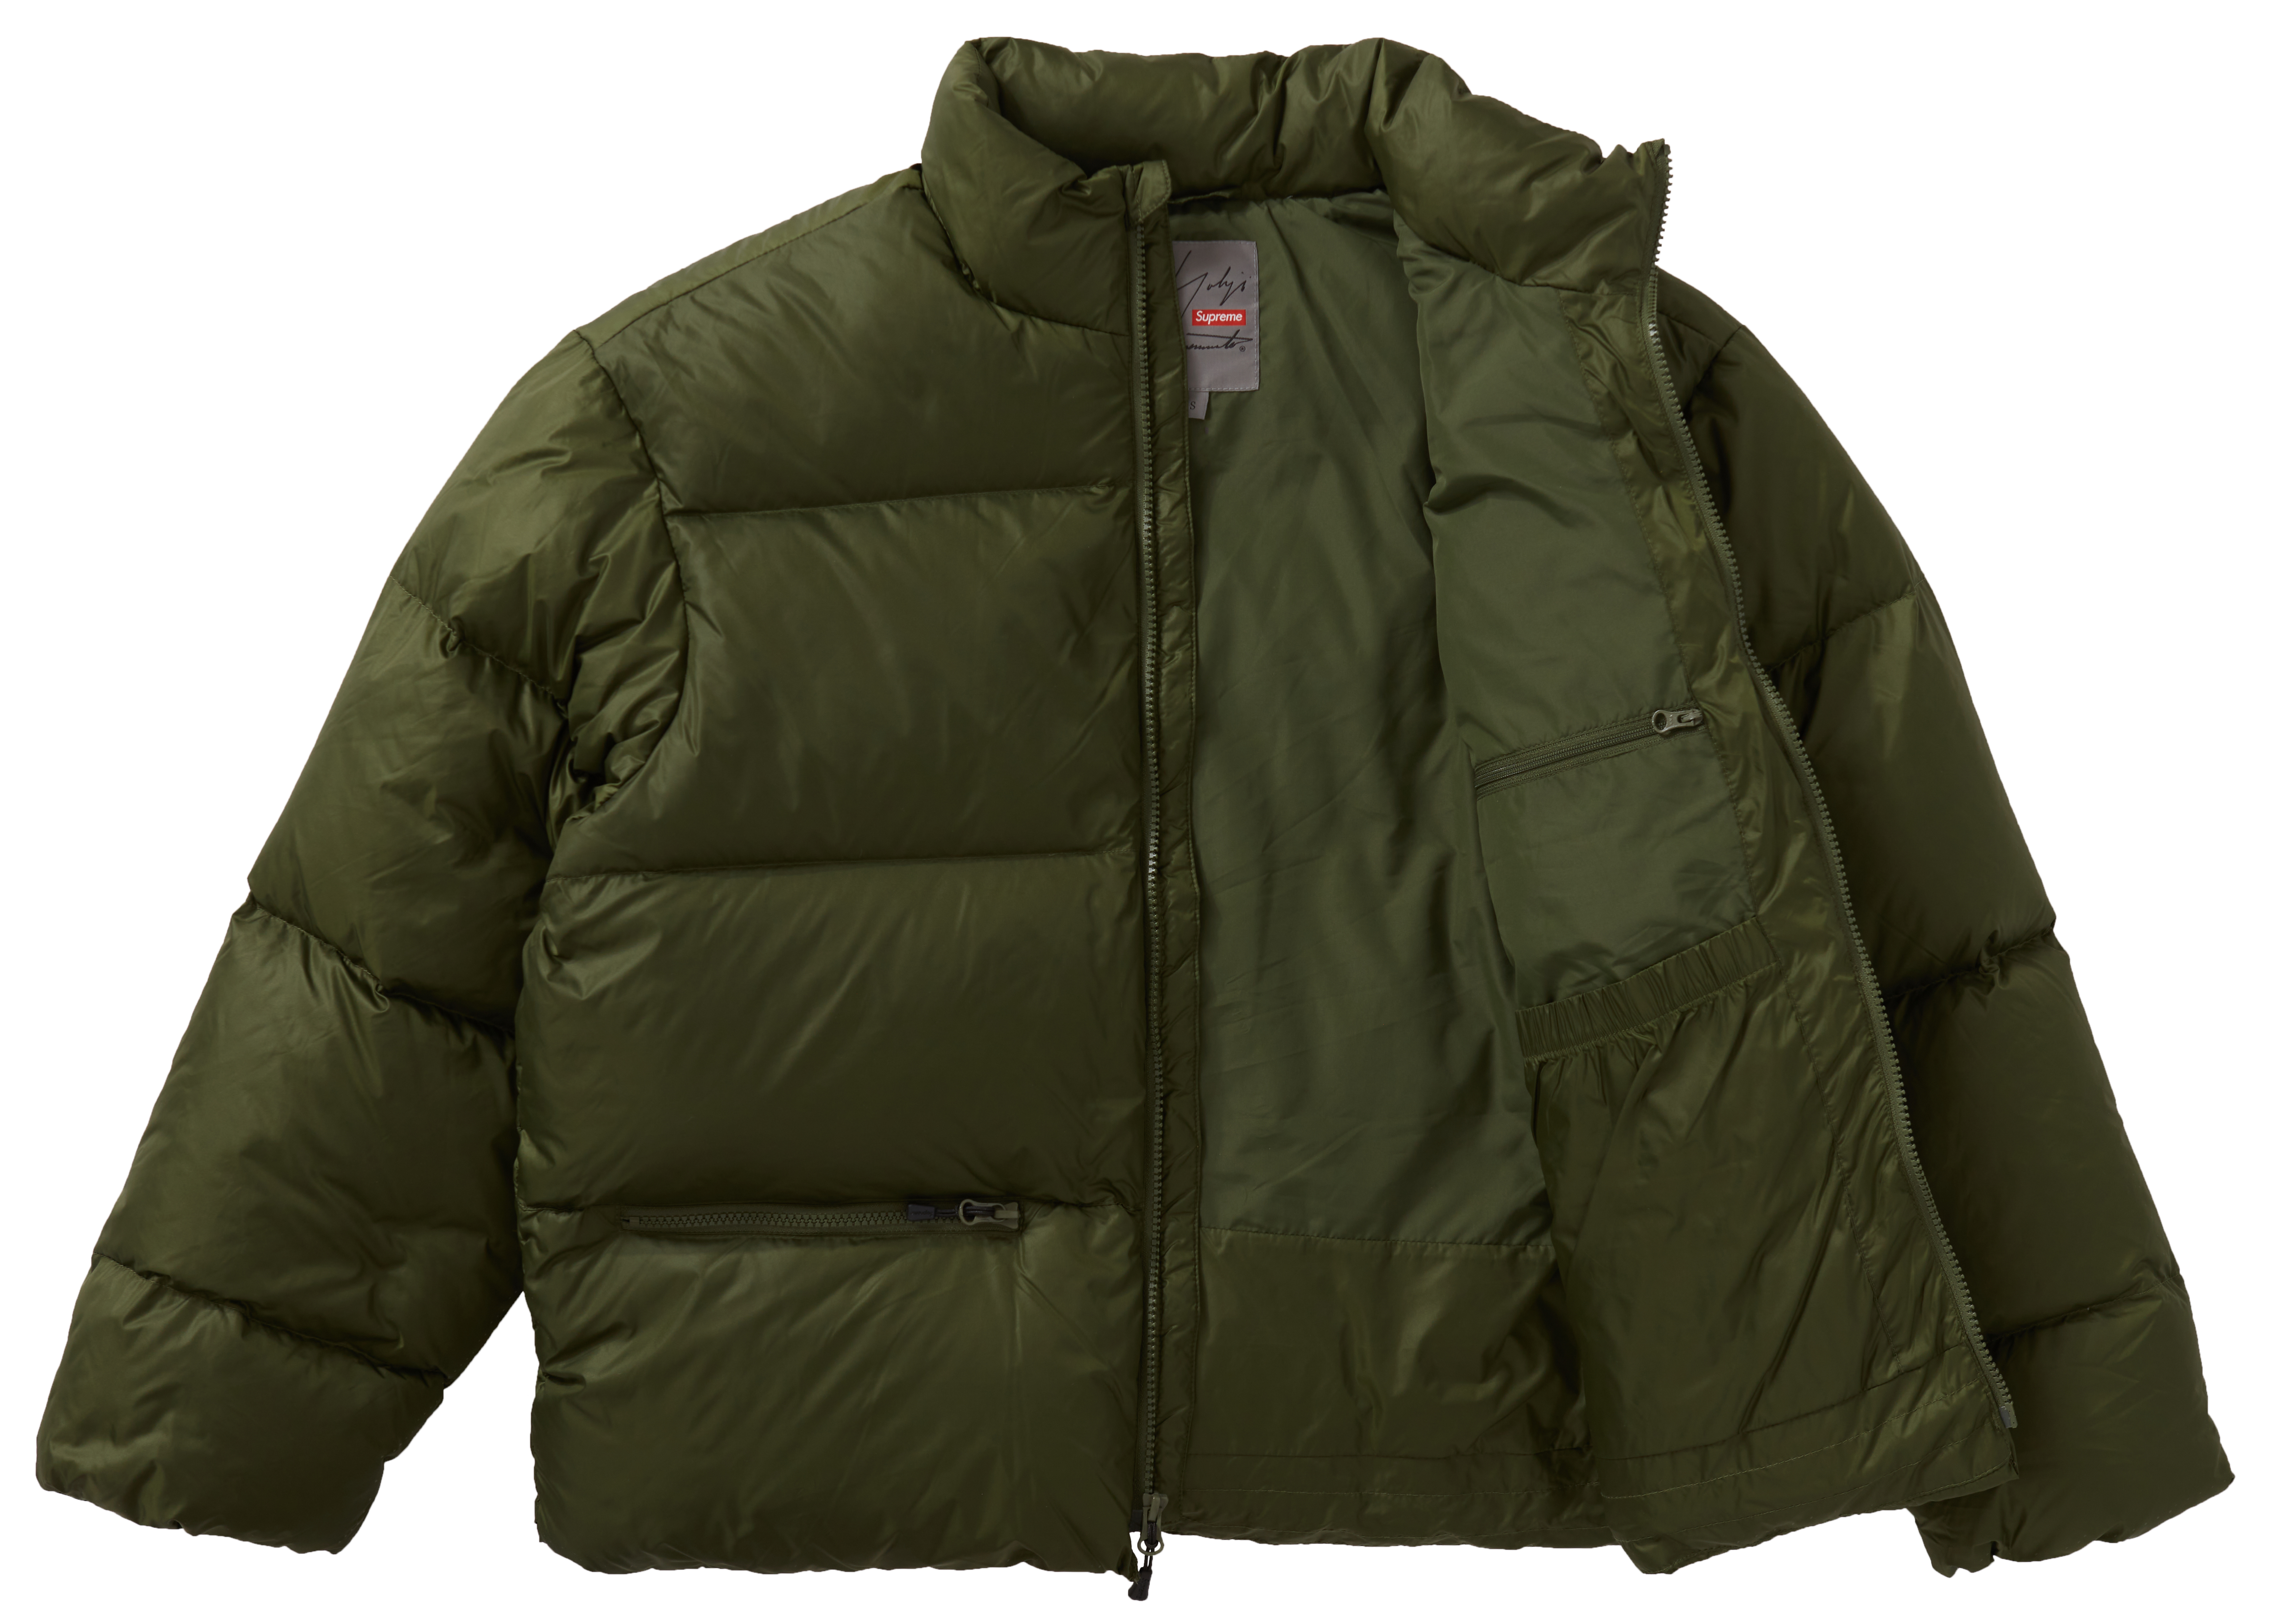 Must-Have Supreme Jackets for the Winter - Novelship News